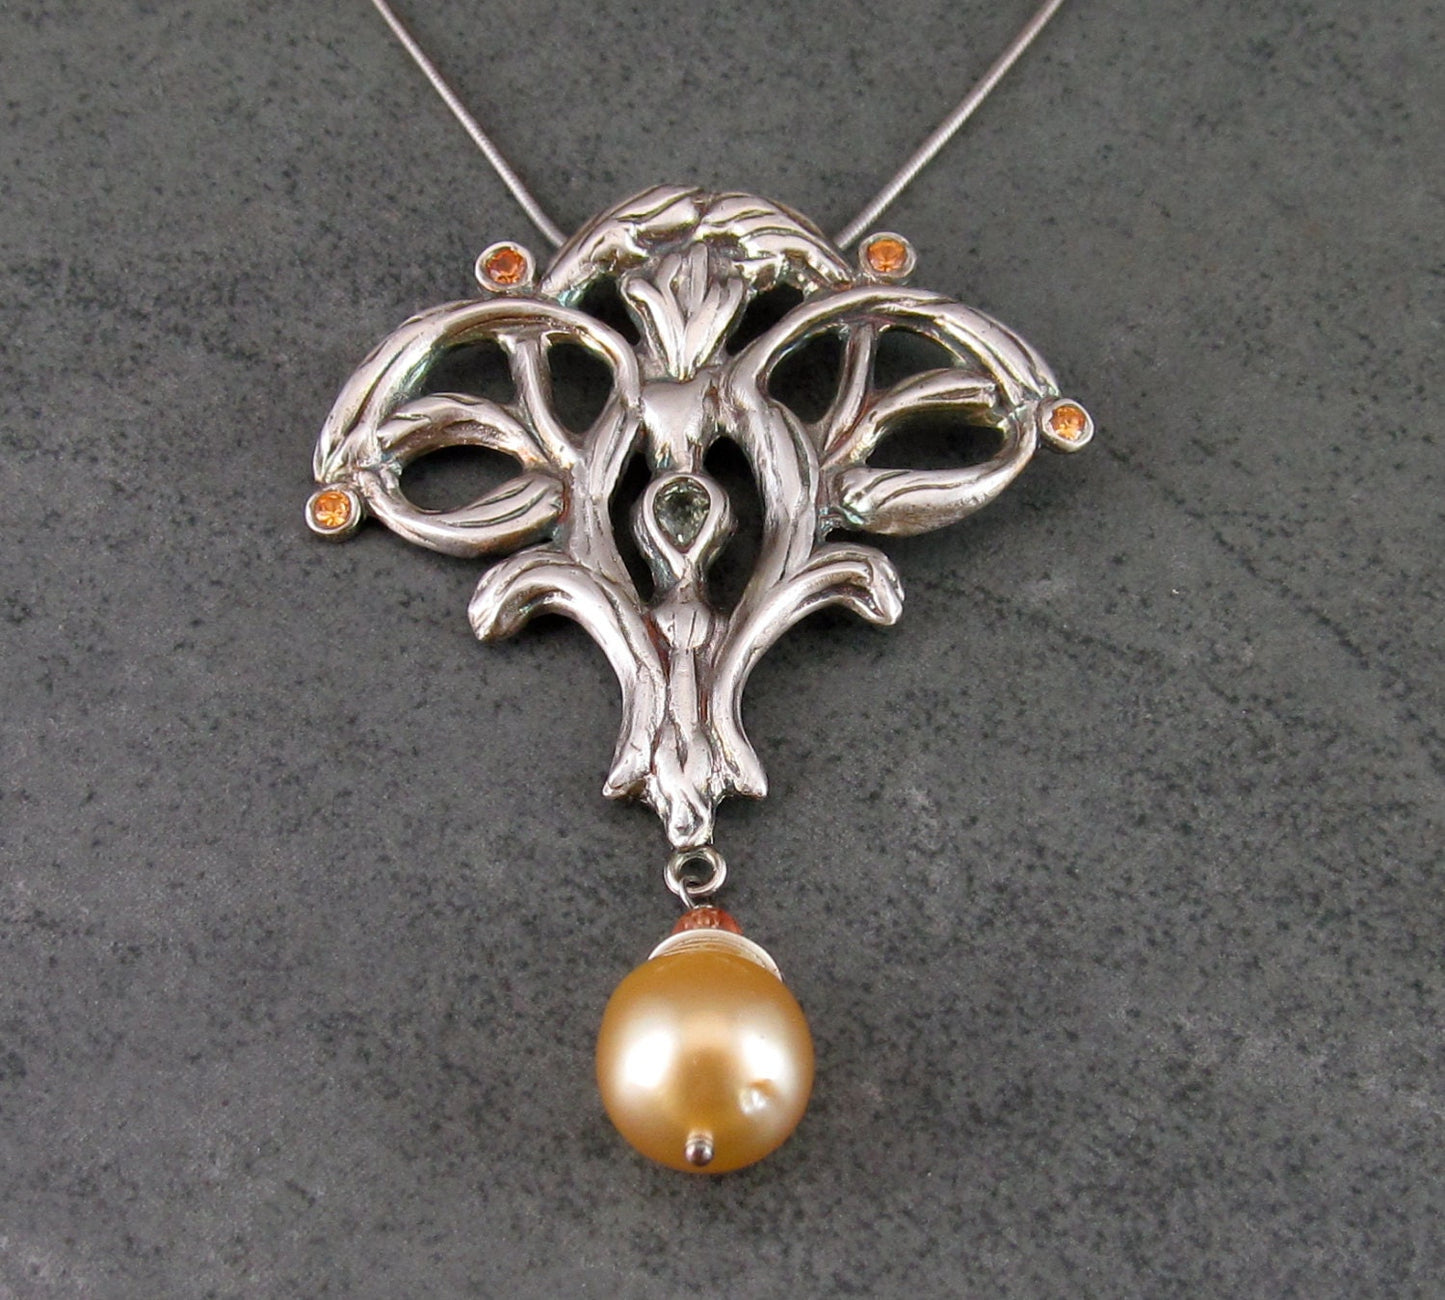 Songea sapphire pendant, handmade recycled fine silver w/ gold South Sea pearl, Edwardian style necklace-OOAK